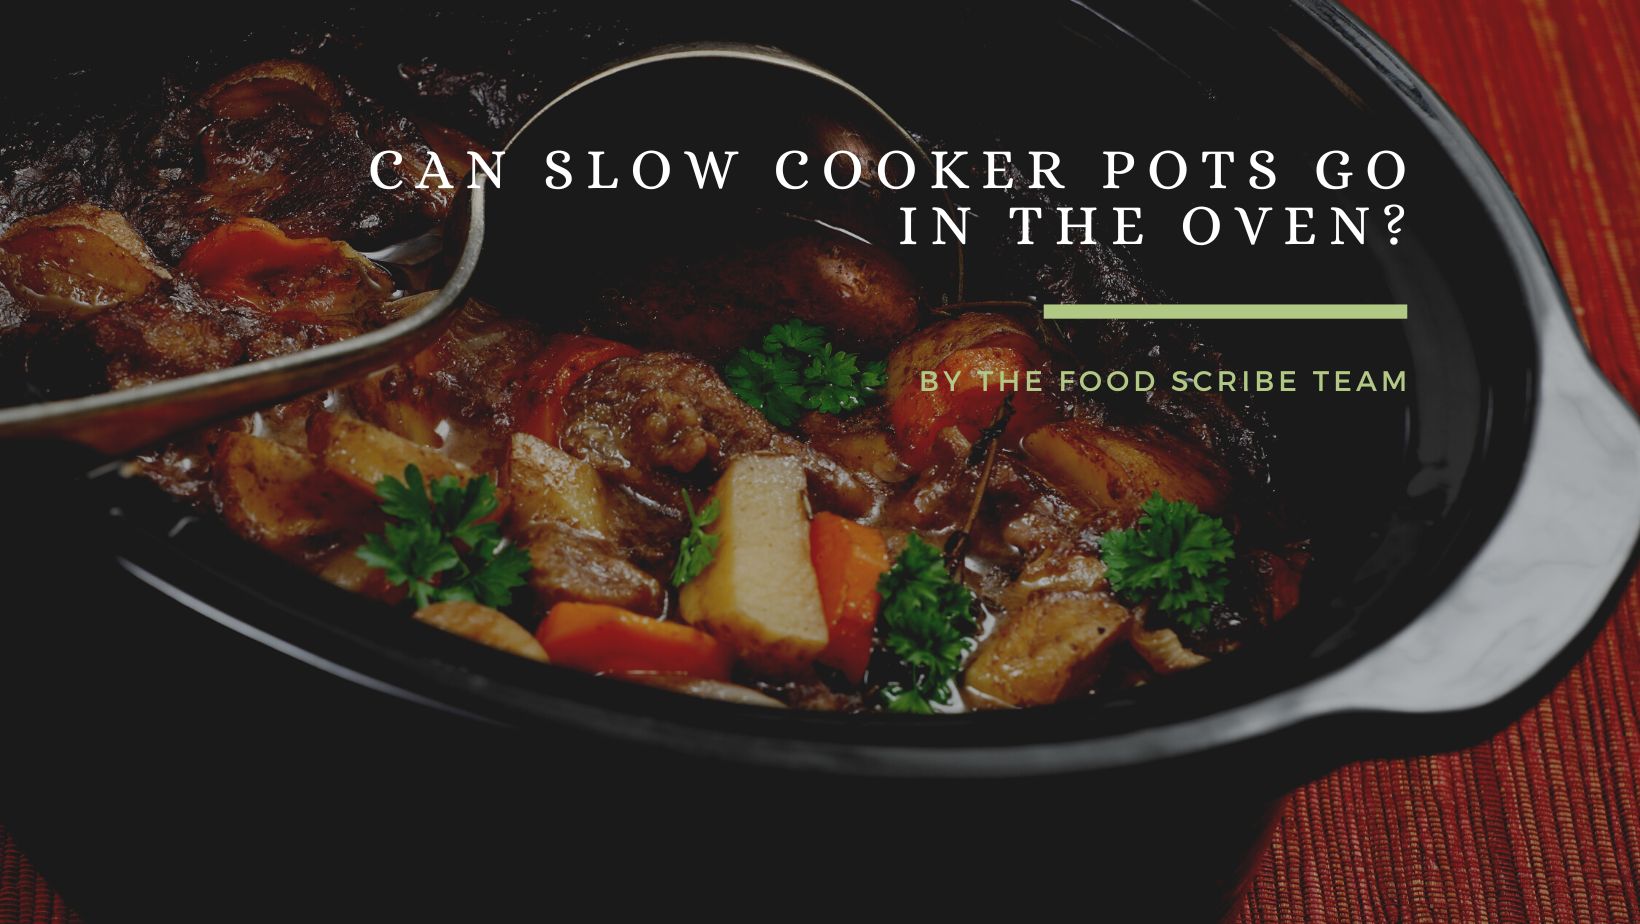 Can Slow Cooker Pots Go In the Oven?